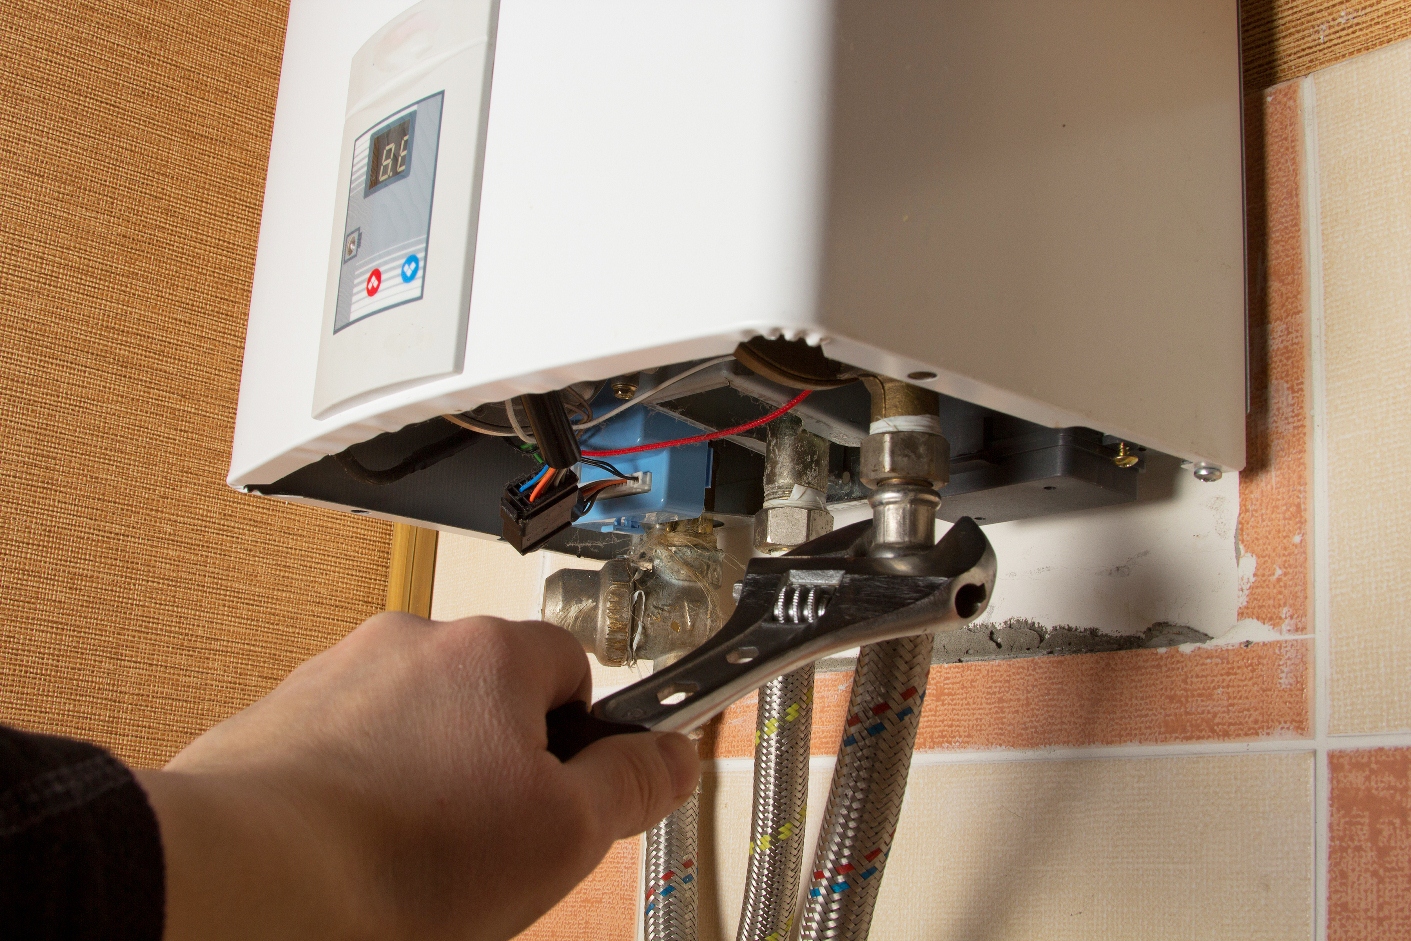 6 Best Gas Tankless Water Heaters to Provide You with Hot Water on Demand (Summer 2022)